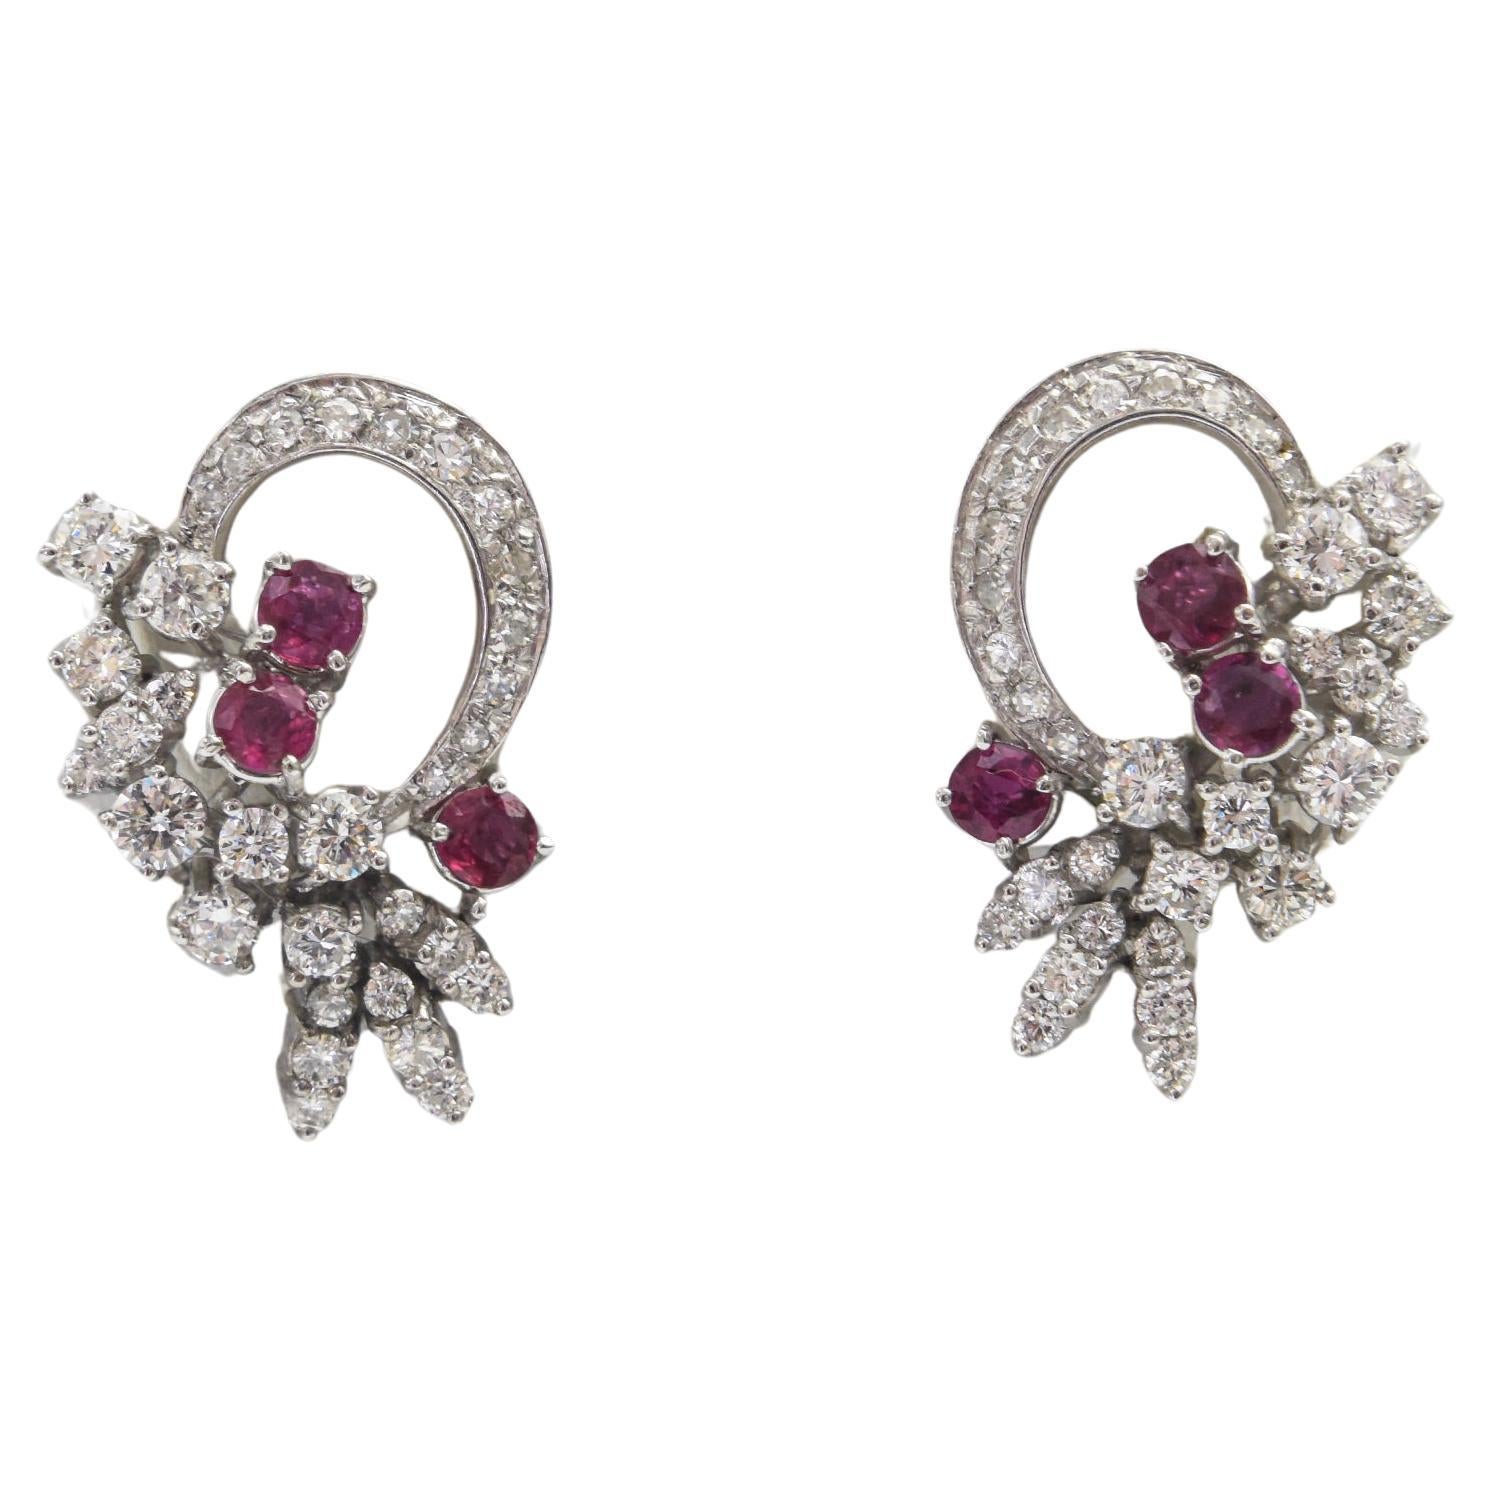 Mid 20th Century Diamond and Ruby Spray White Gold Earrings